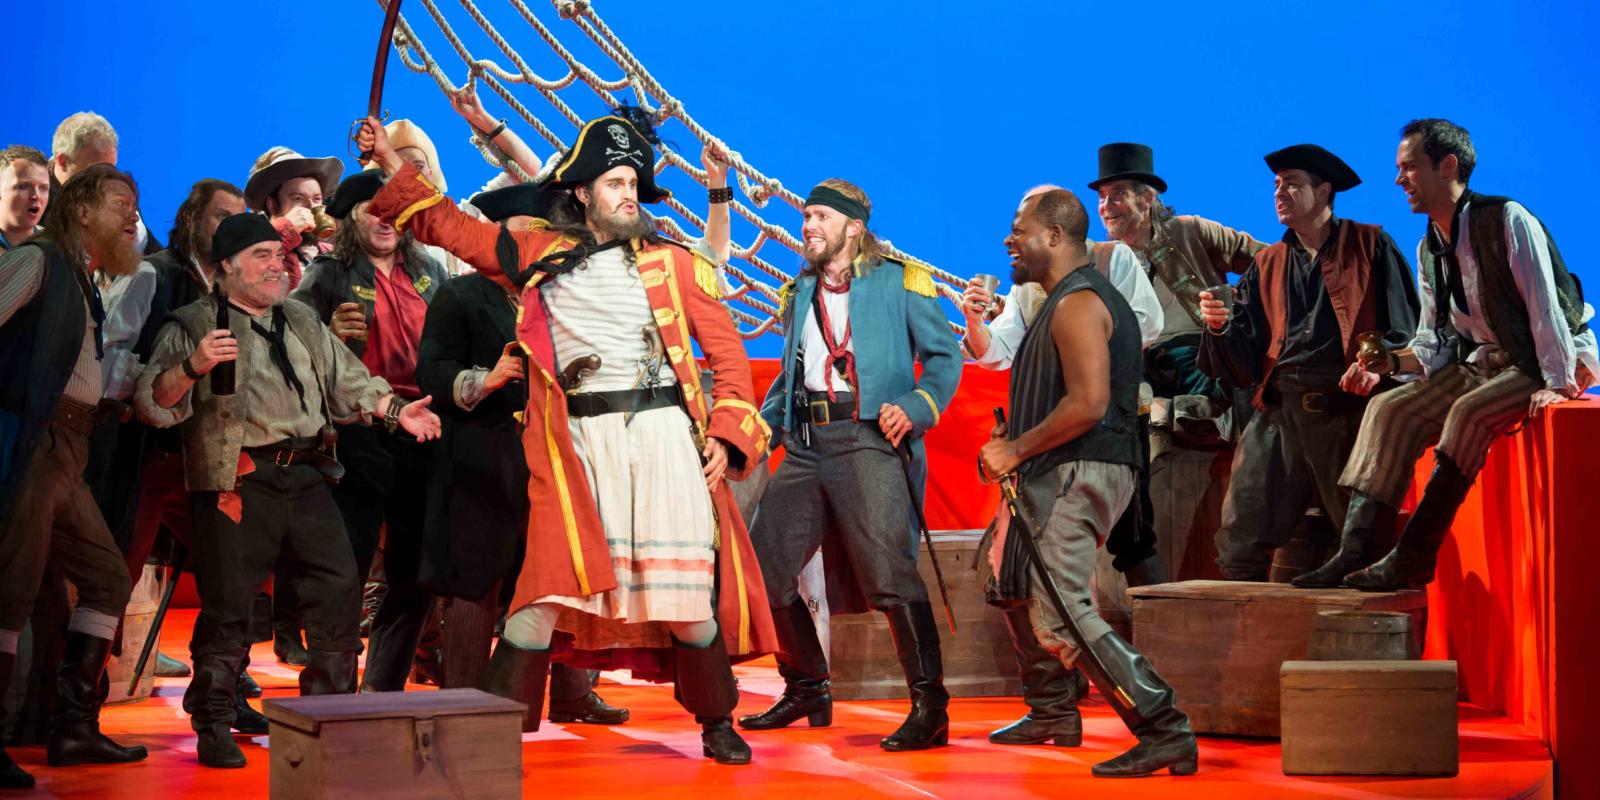 ENO's The Pirates of Penzance - Ashley Riches as The Pirate King, Johnny Herford as Samuel and ENO Chorus. Photo by Tom Bowles